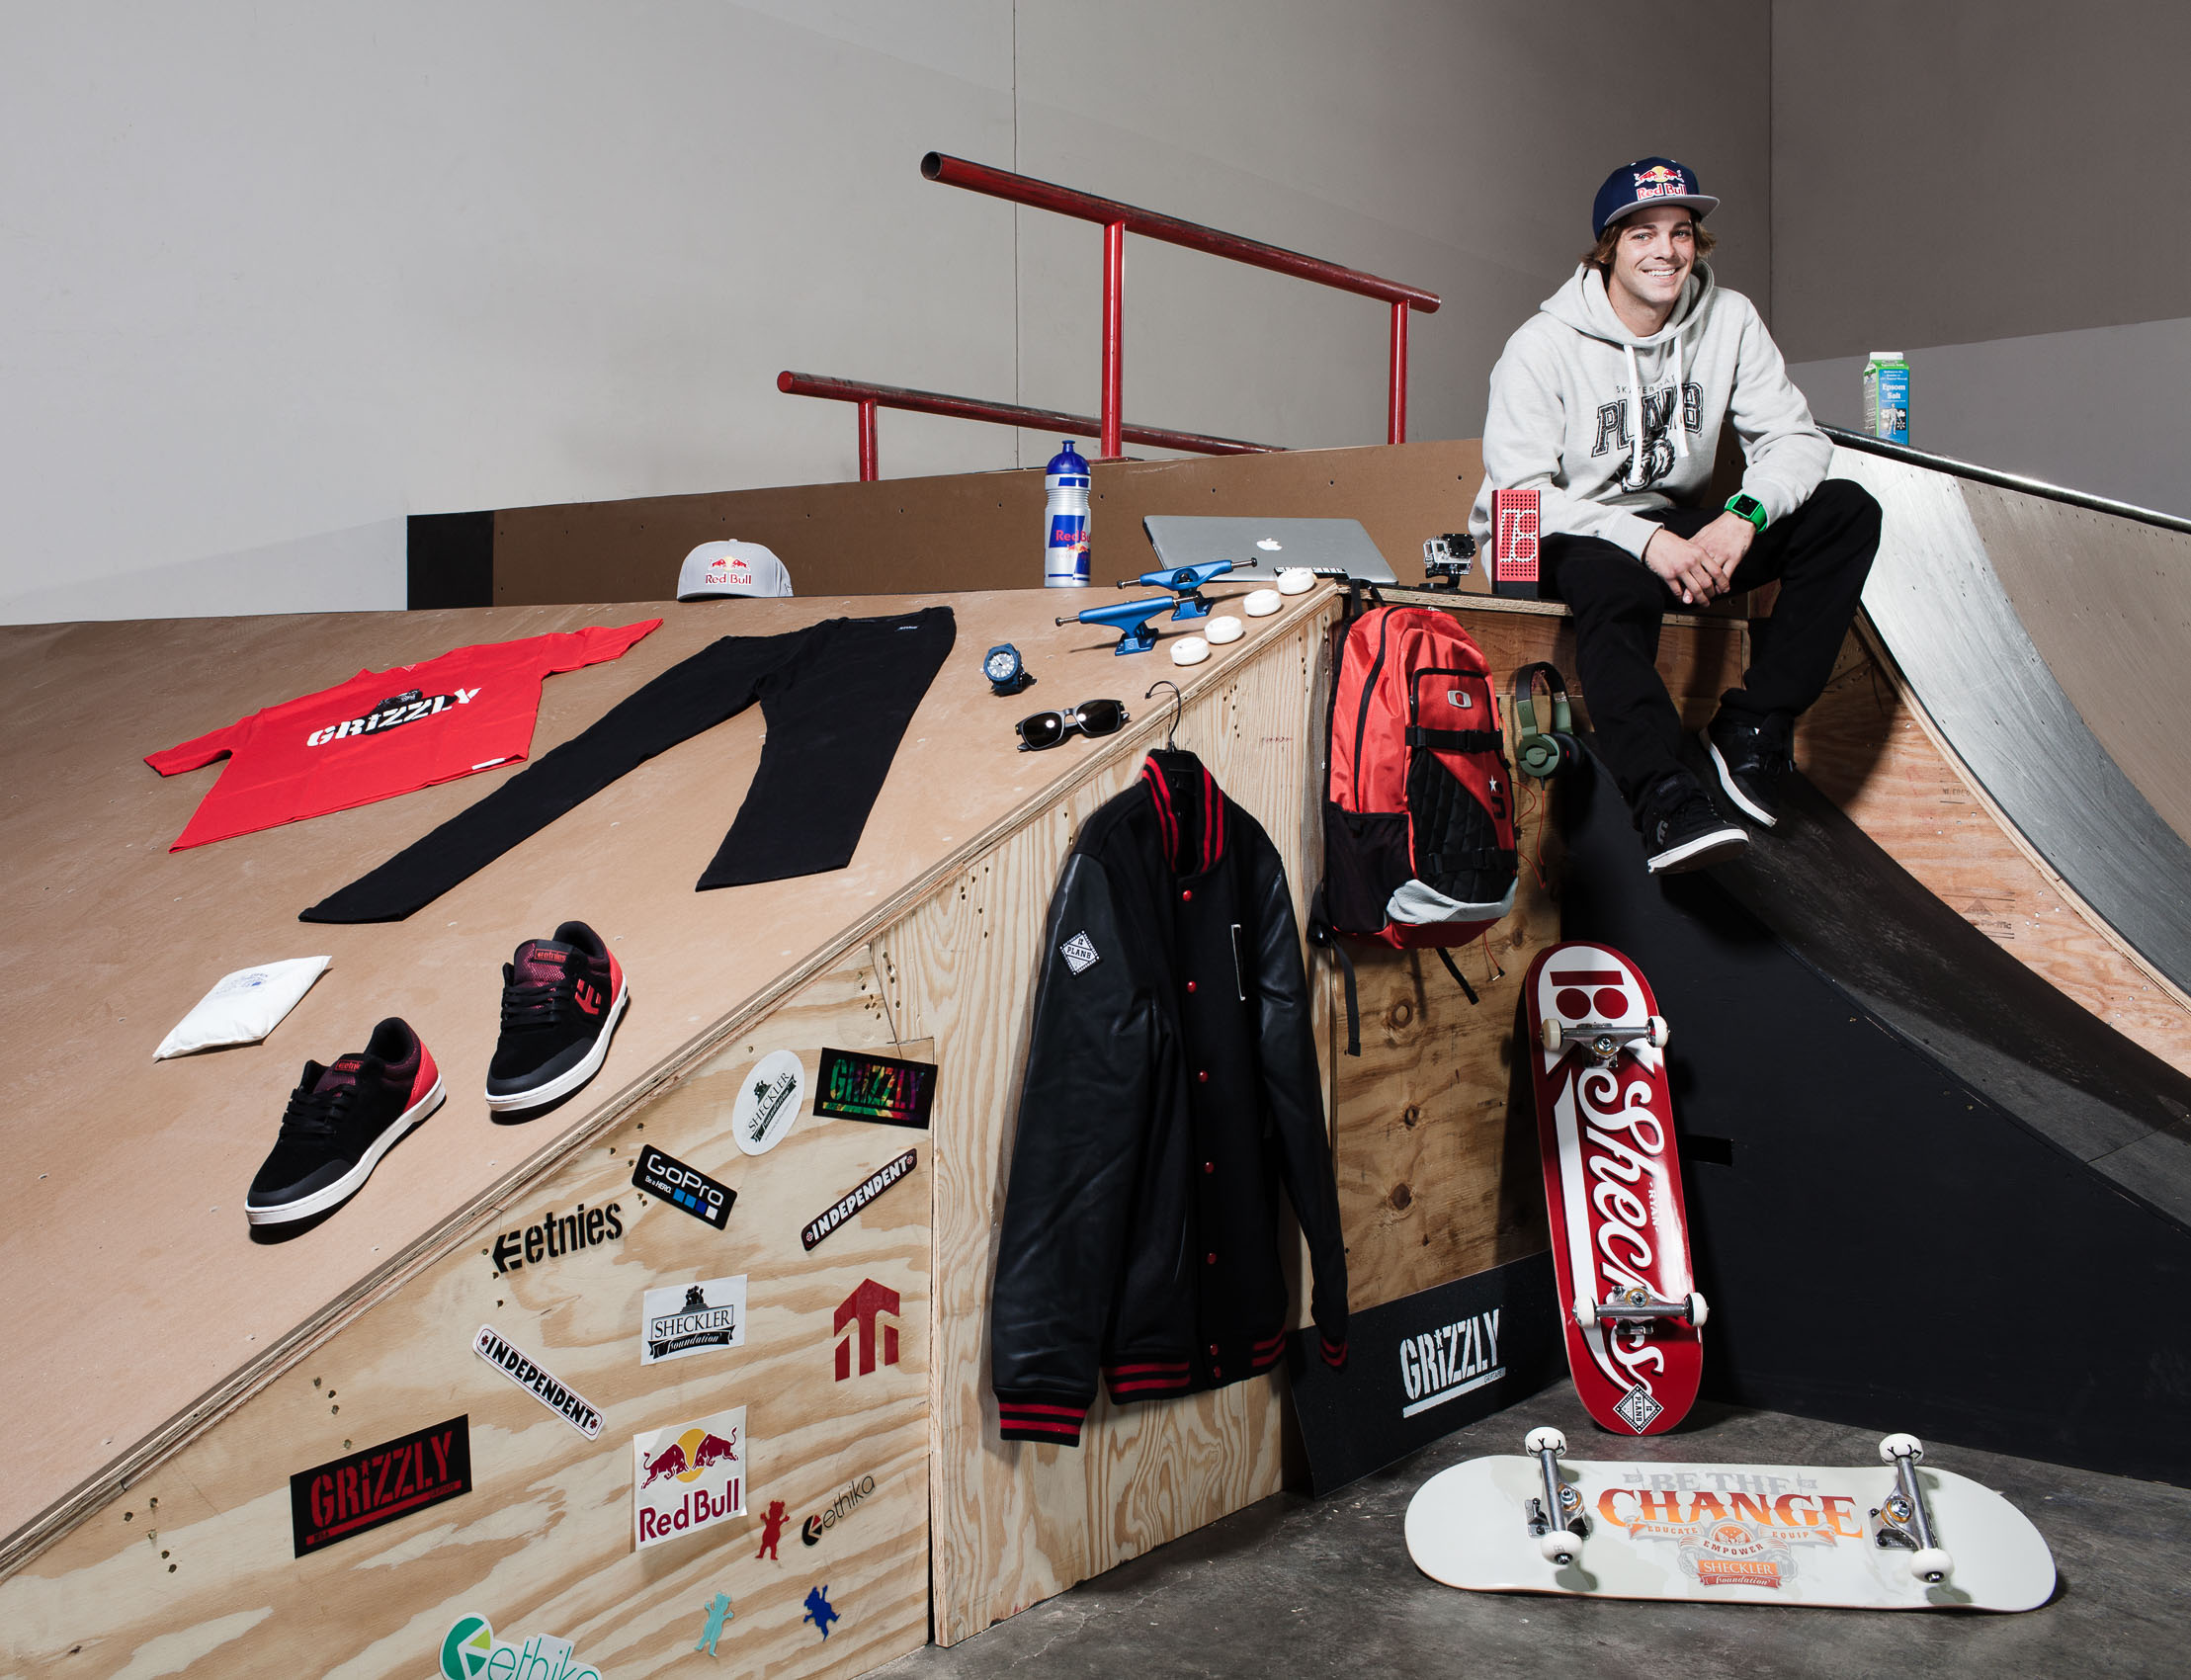 Ryan Sheckler, professional skateboarder - Get the gear | Los Angeles | Editorial and Commercial Photographer Patrick Strattner